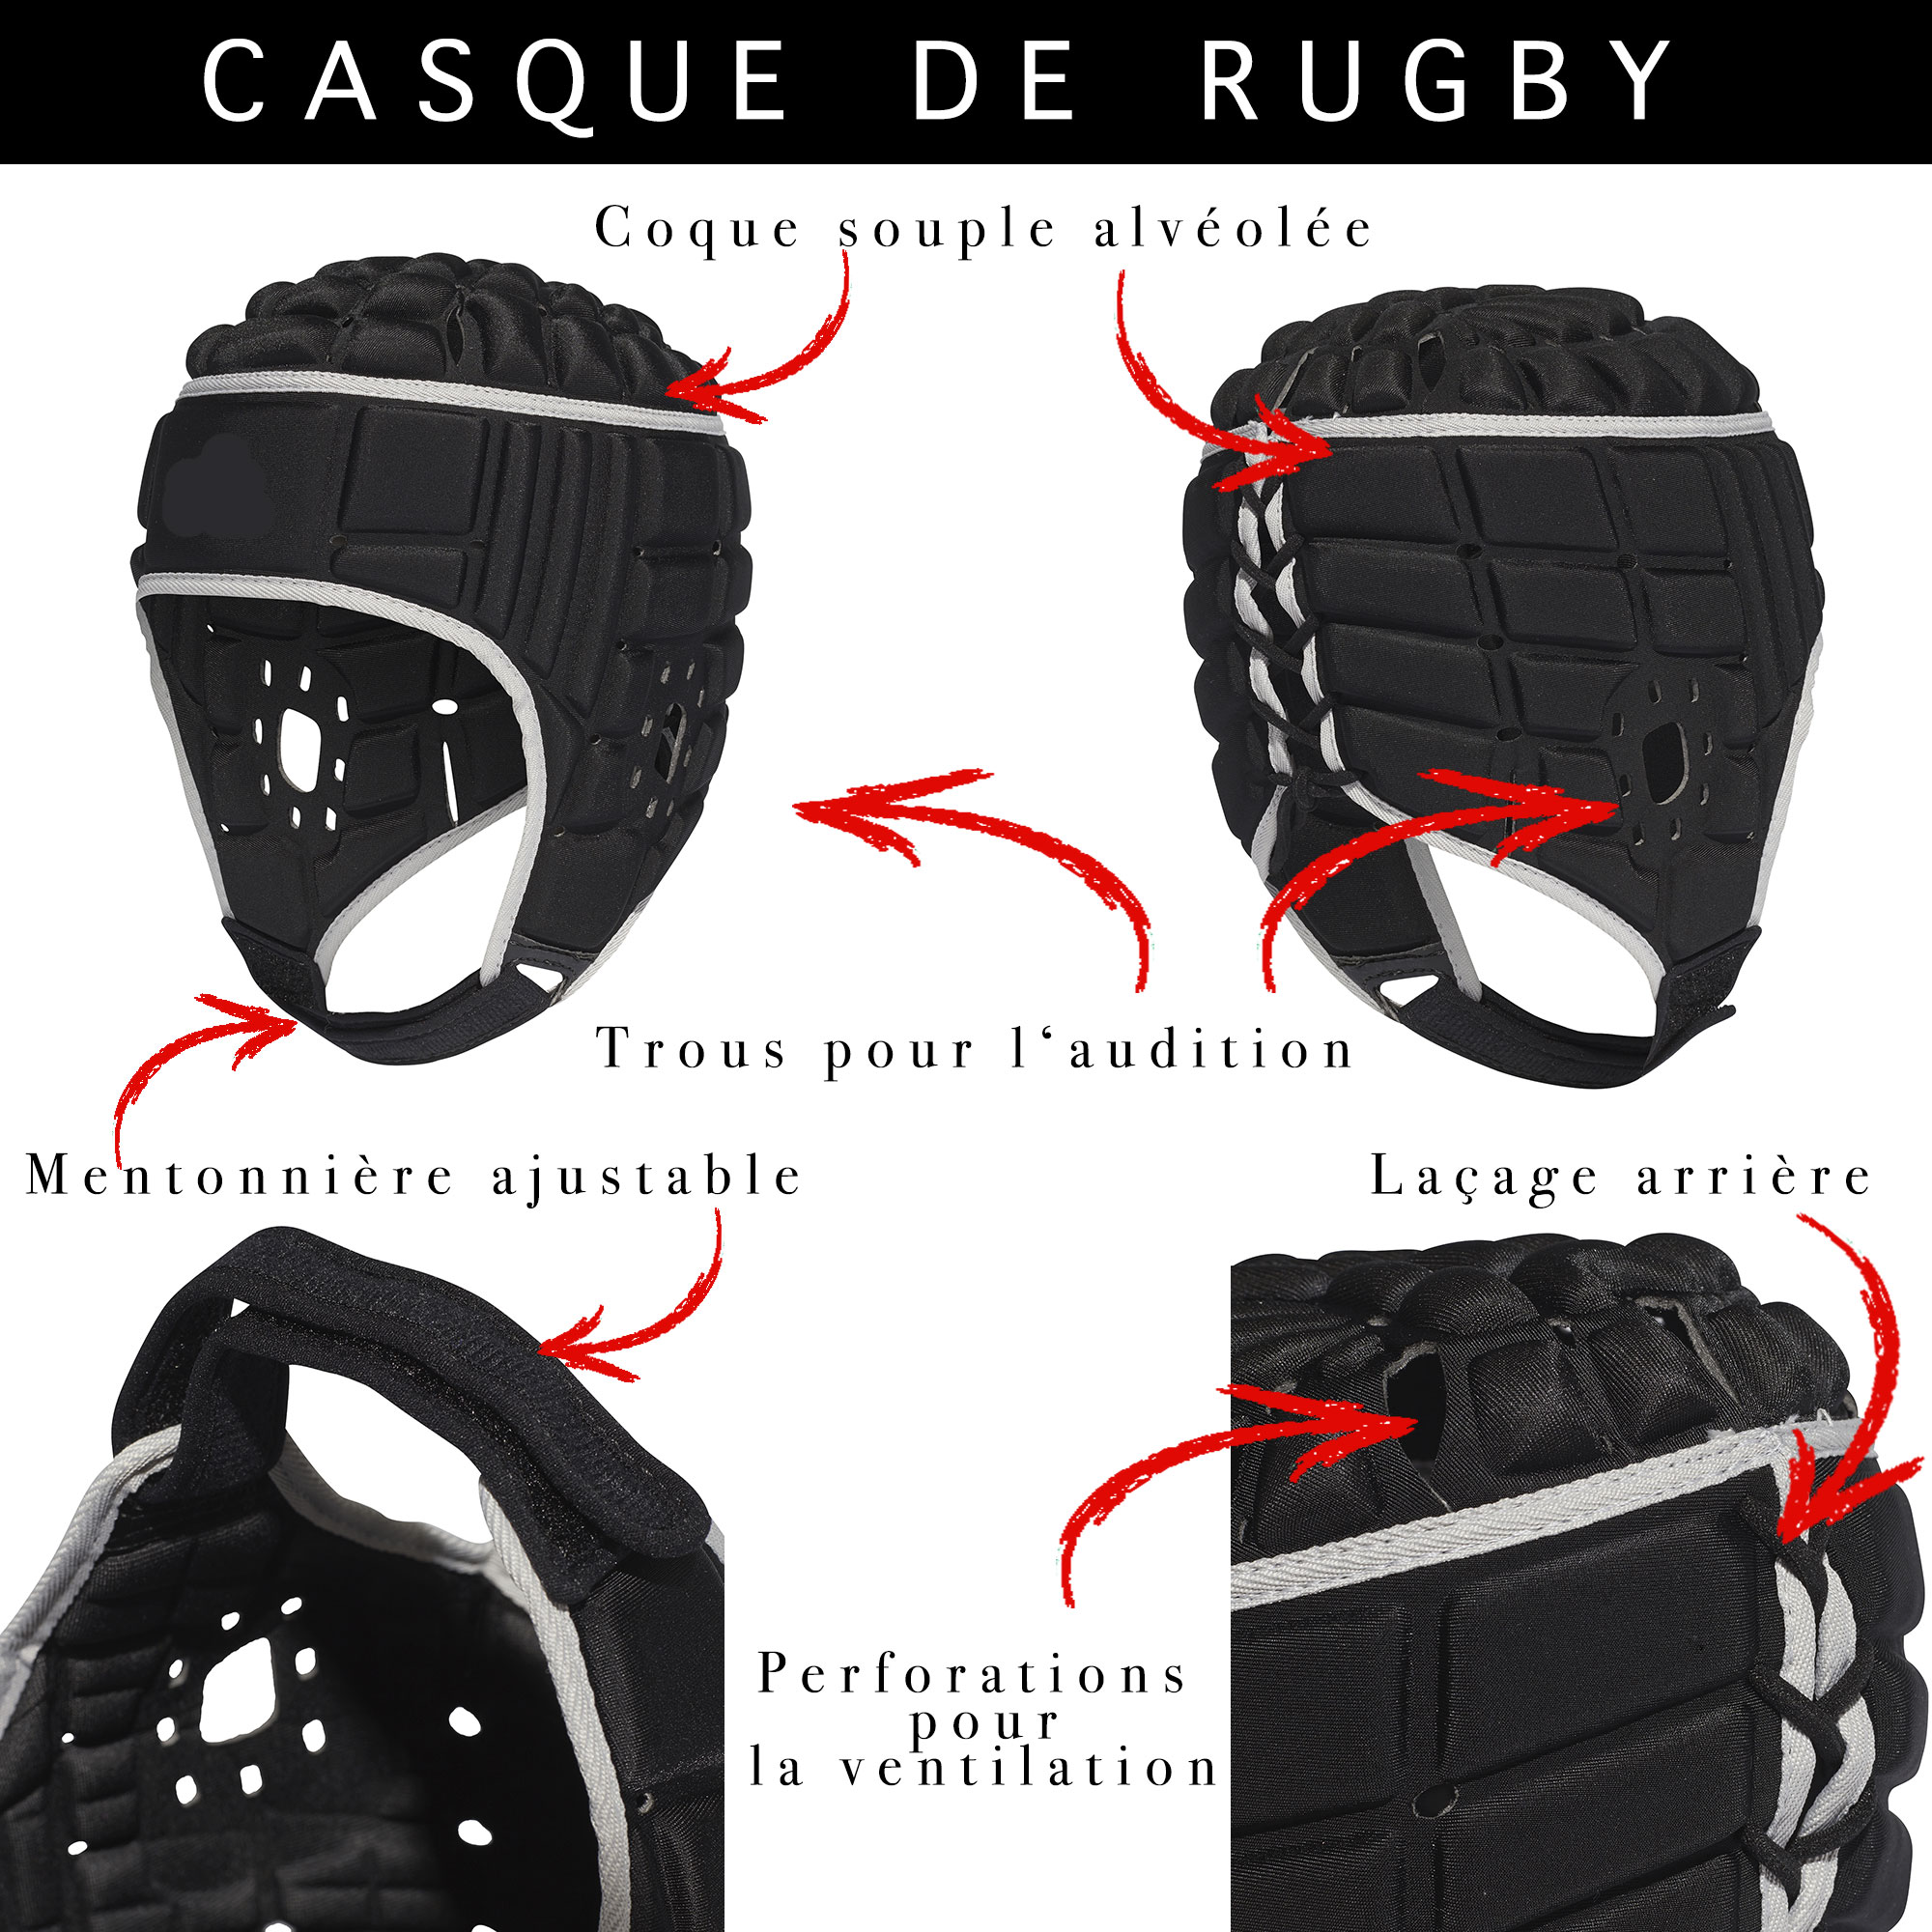 Casque rugby 500 adulte  Casque de rugby, Rugby, Casque